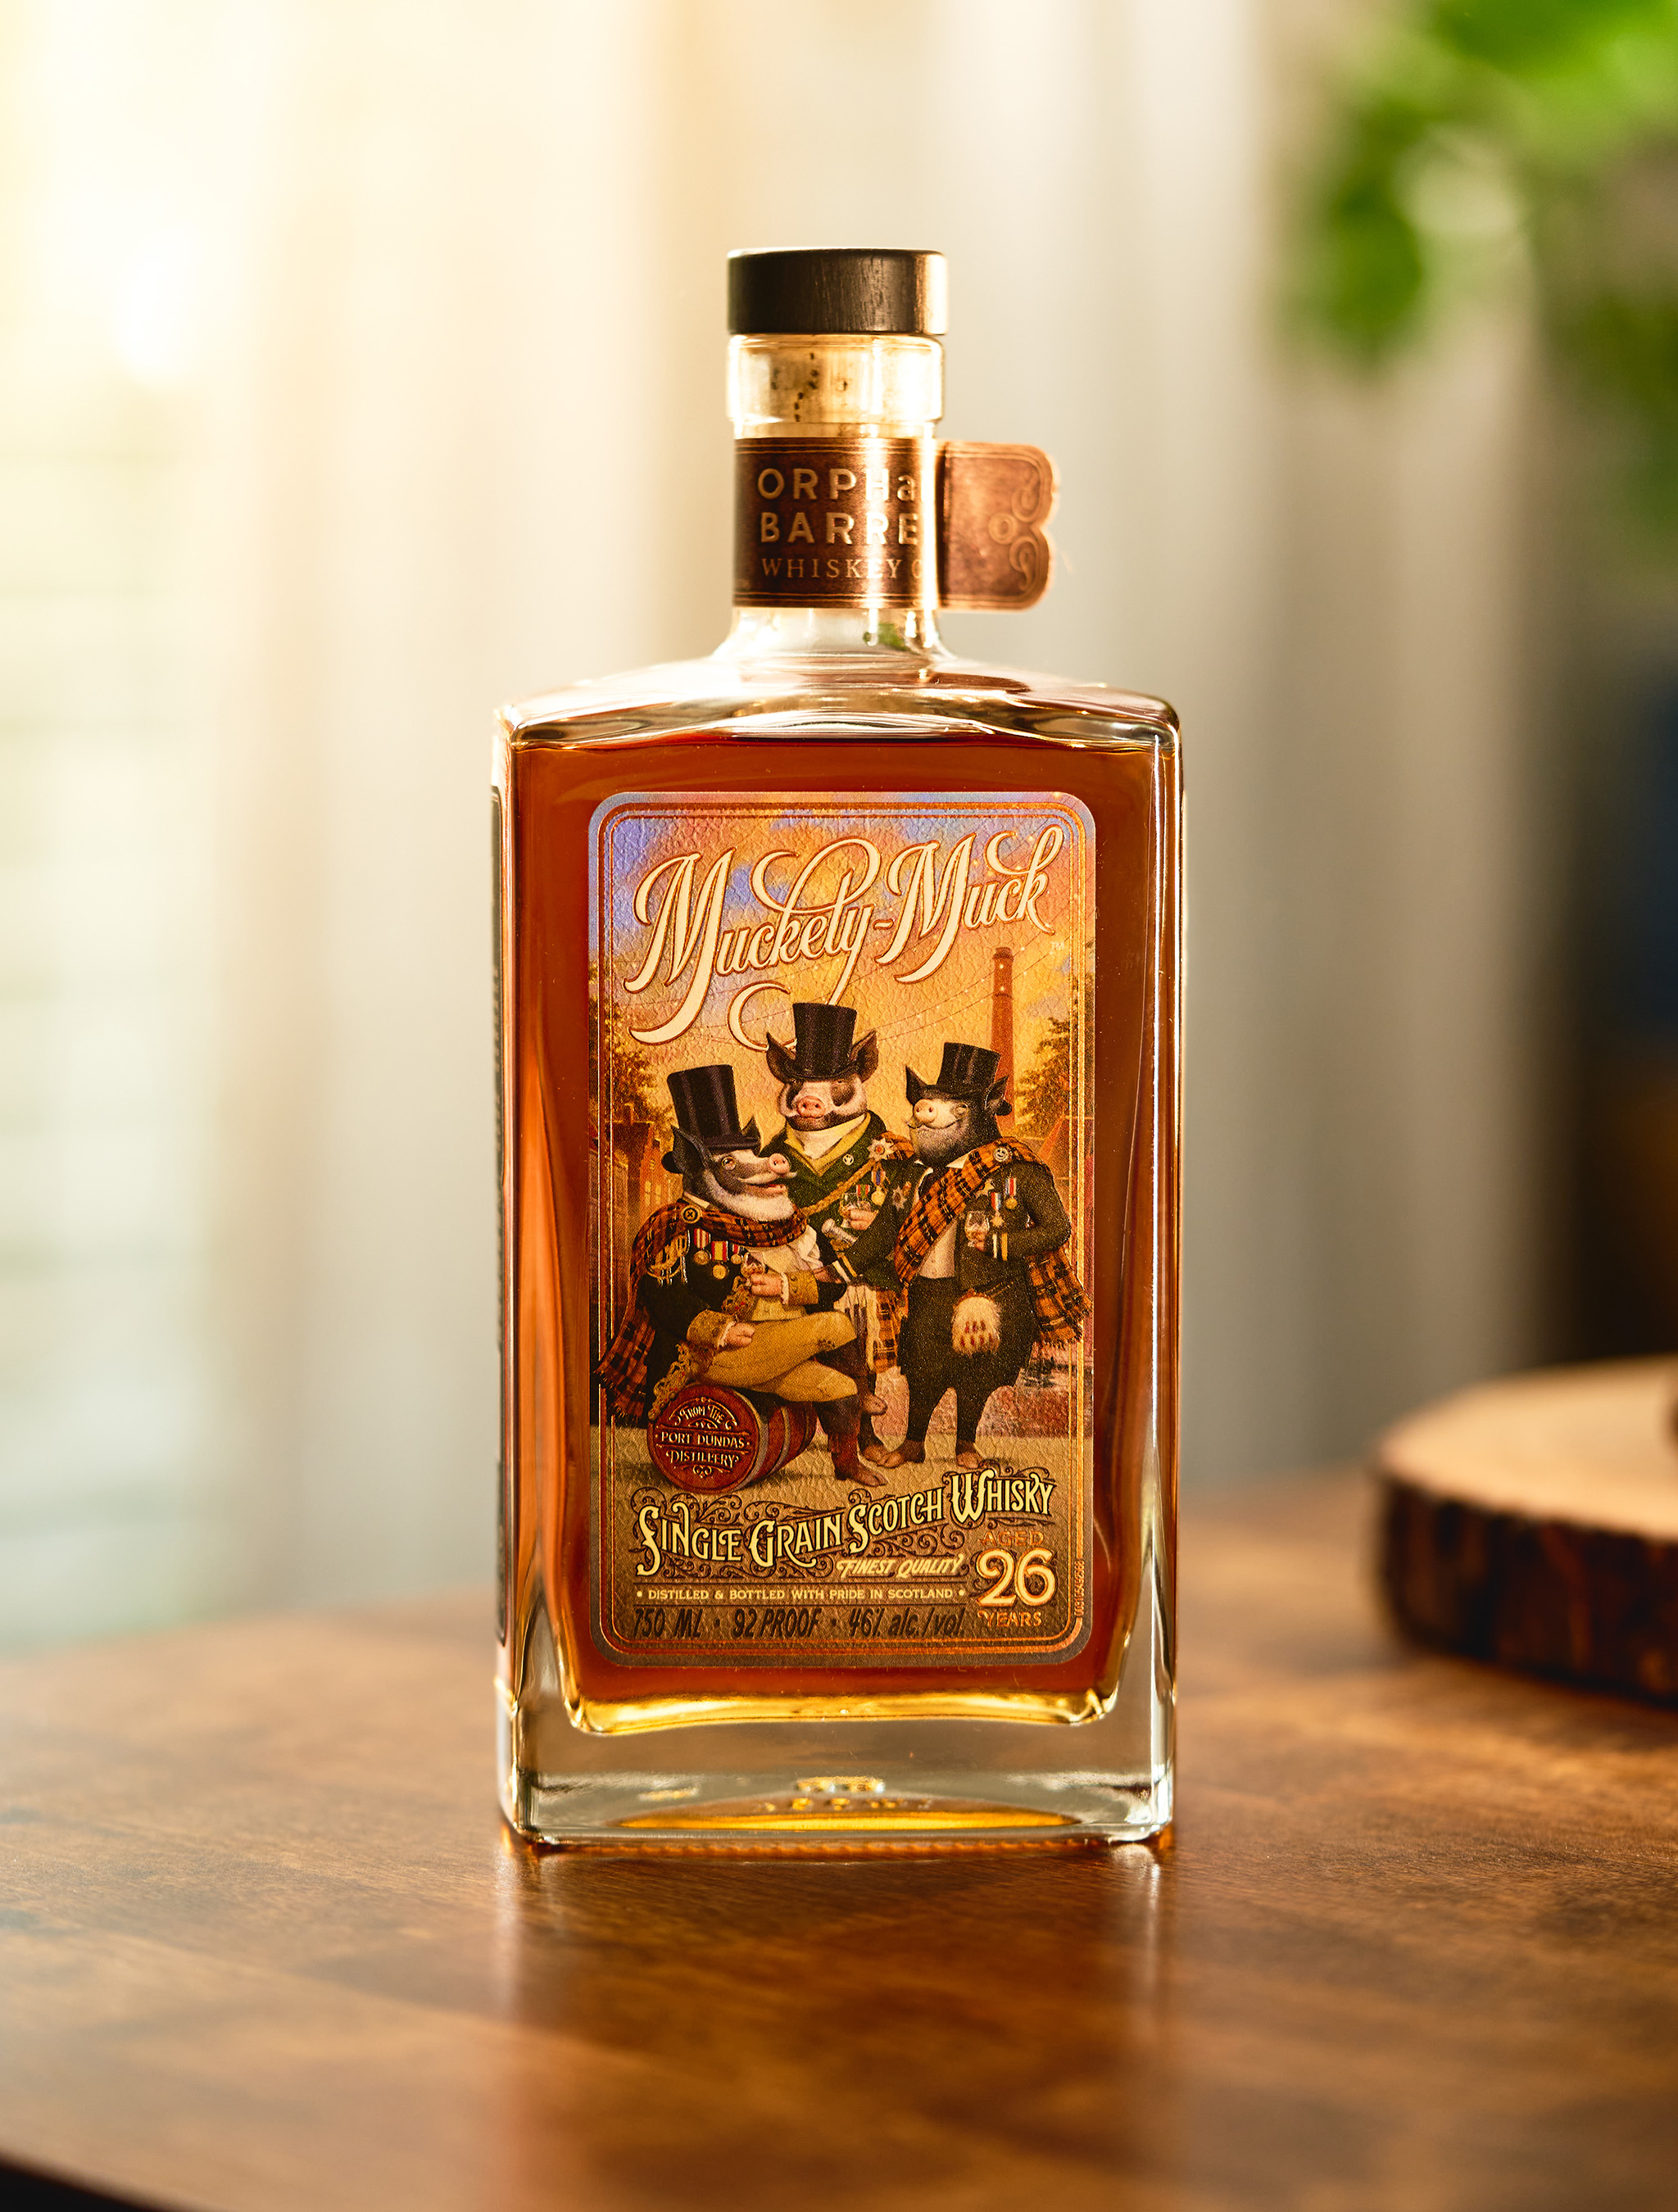 DIAGEO's Orphan Barrel Whisky Co. Introduces Muckety-Muck 26 Year Old, The Third And Final Single Grain Scotch Whisky in the Muckety-Muck Series from Port Dundas Distillery